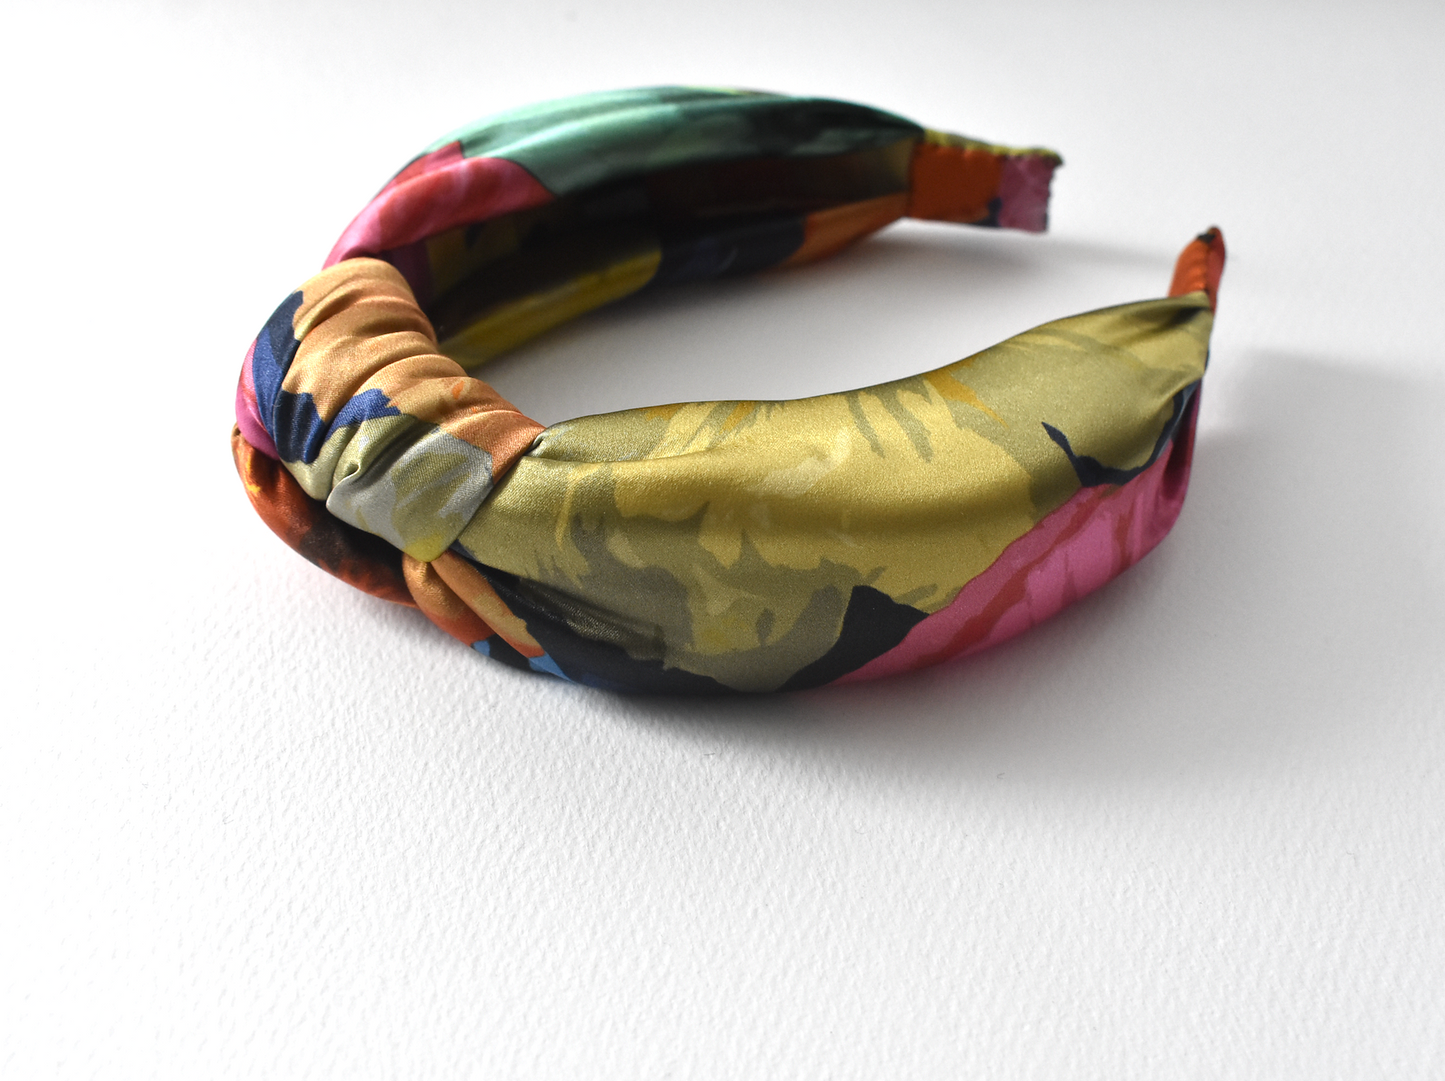 Luxury Silk Knot Alice band - Liberty of London Poppy Fantastic - Big Floral Graphic 100% Silk-Satin